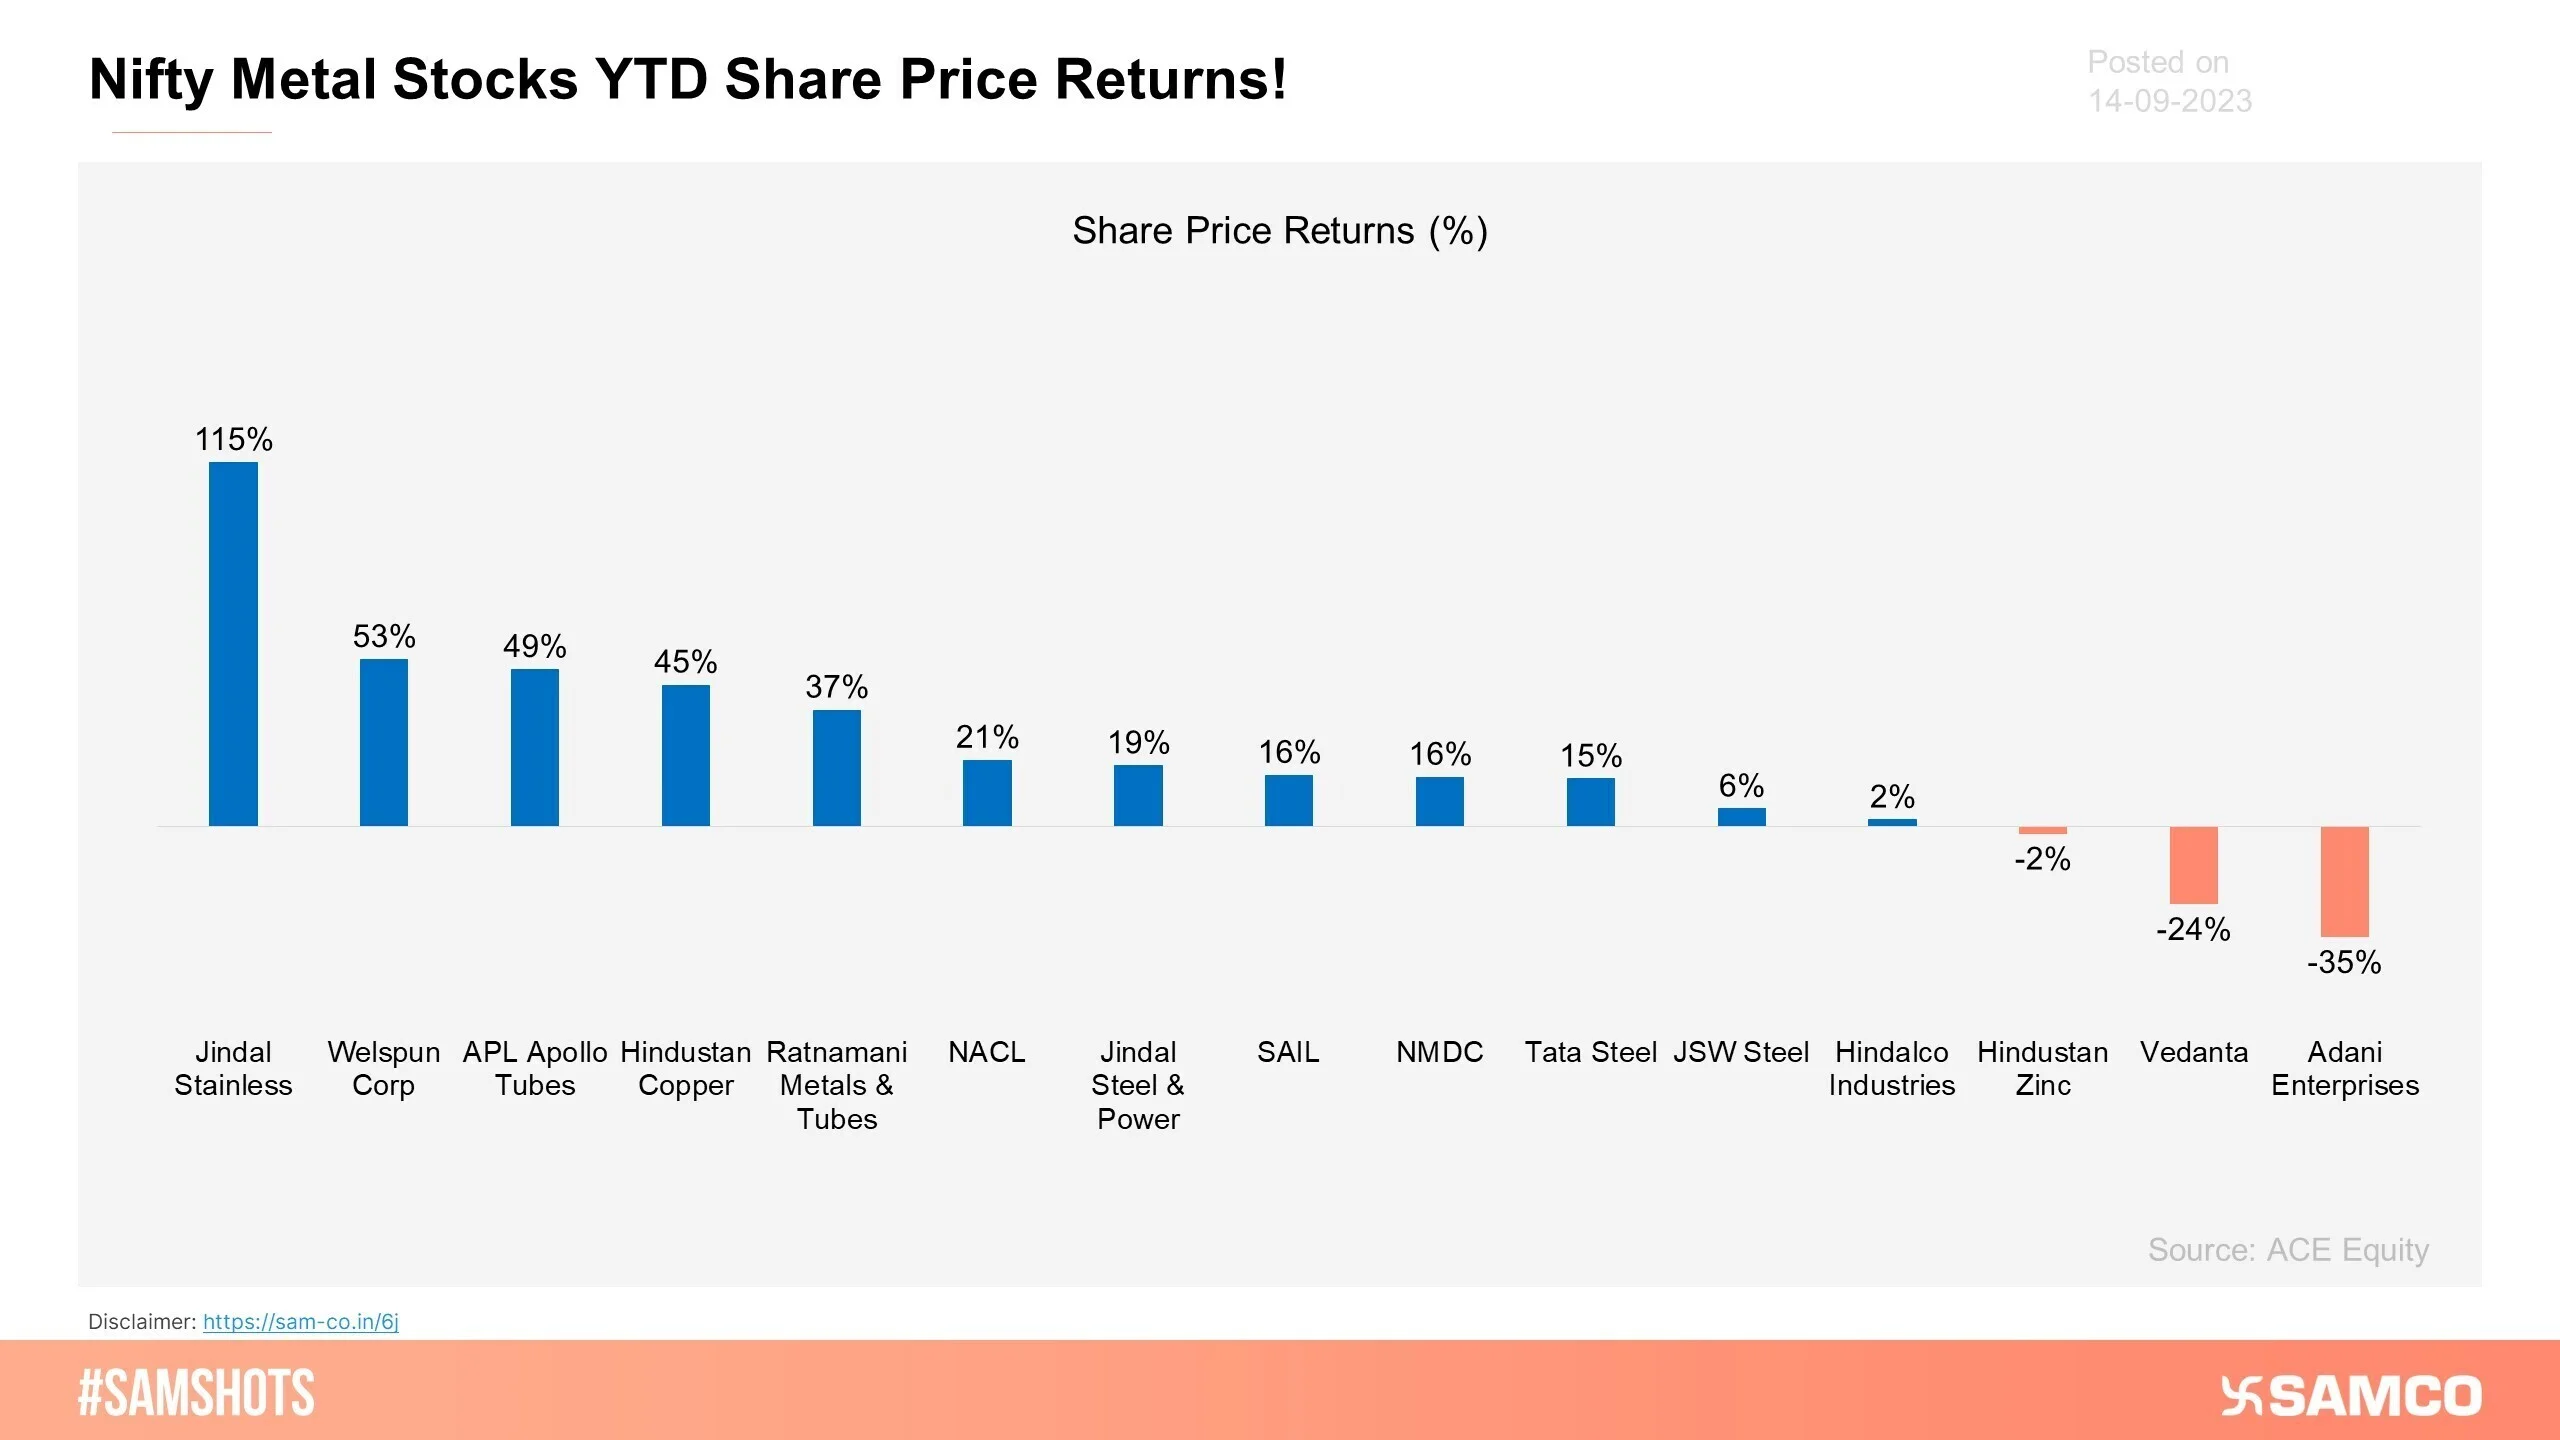 The chart shows the Year-to-Date (YTD) returns delivered by Nifty Metal Stocks